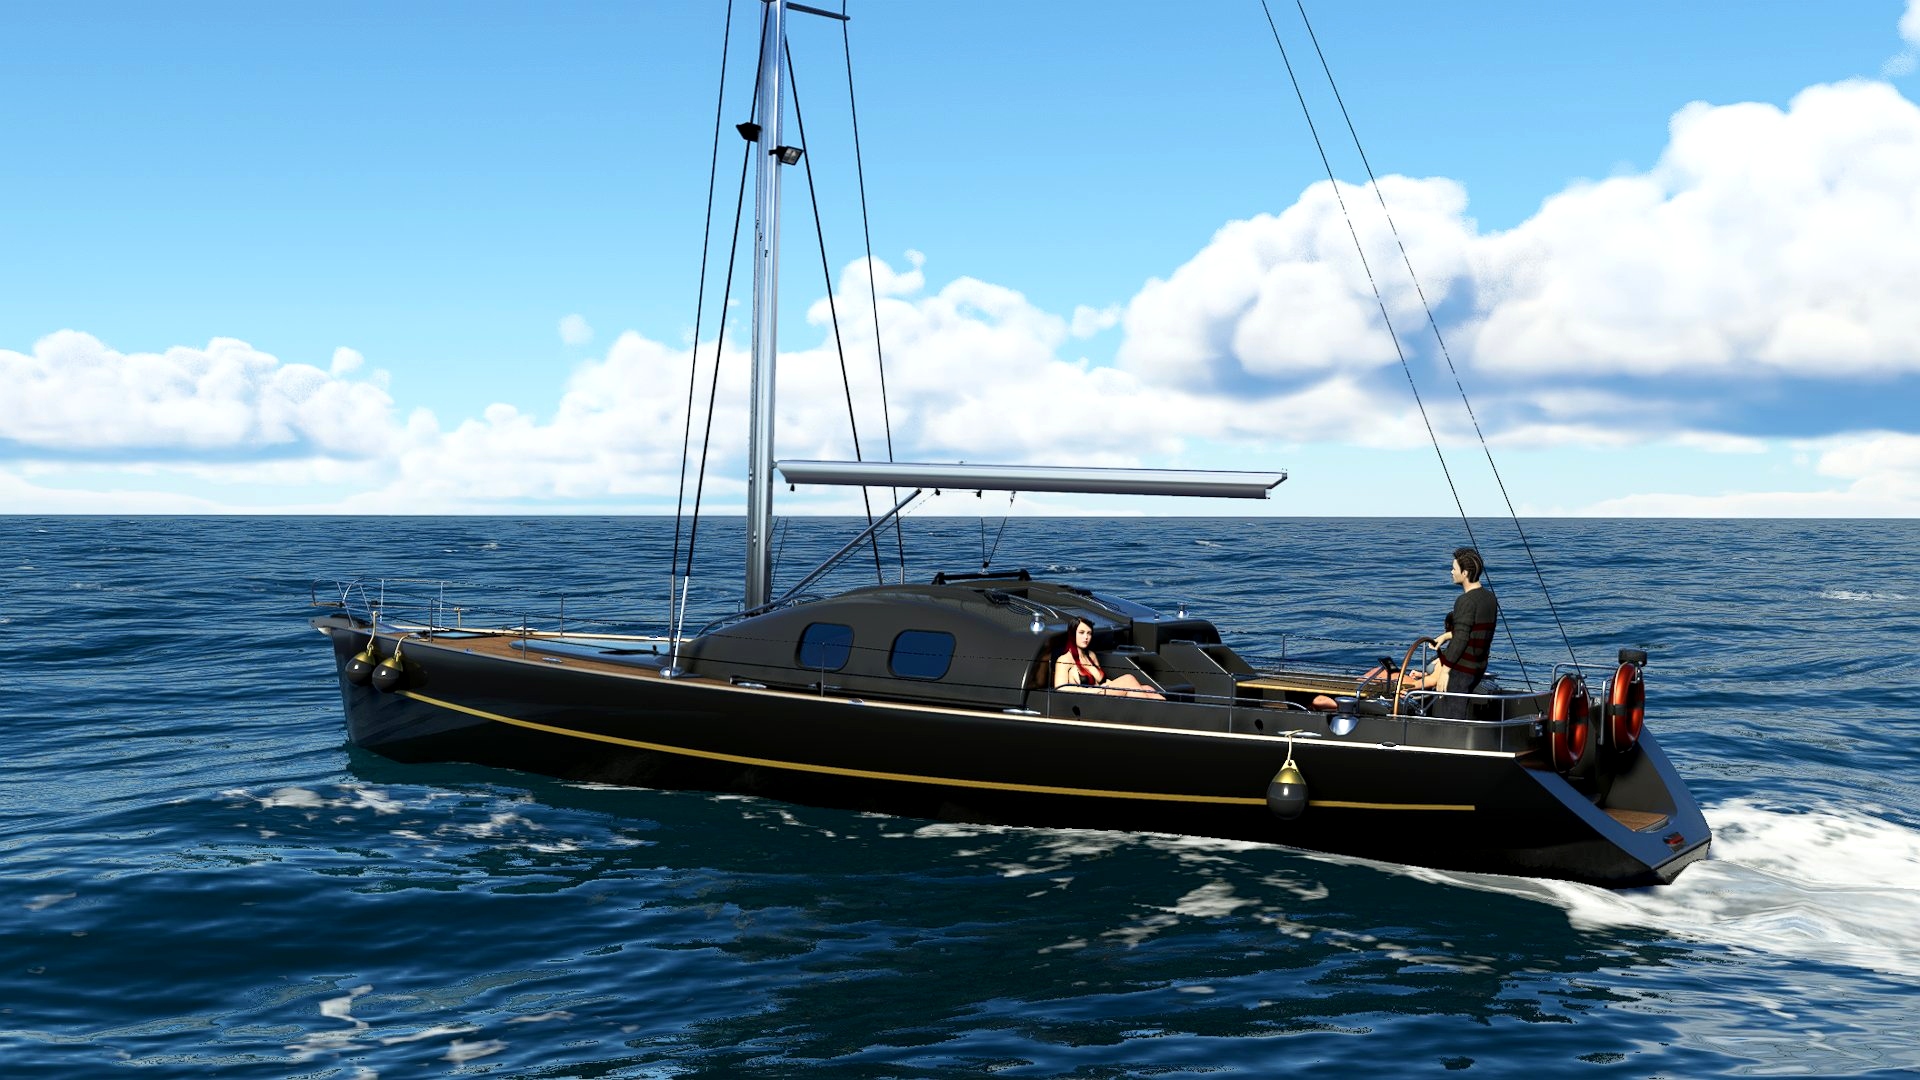 https://pcdn.flightsim.to/images/24/yatch-and-sailboat-pack-5-boats-DsFjU.jpg?auto_optimize=low&amp;width=2056